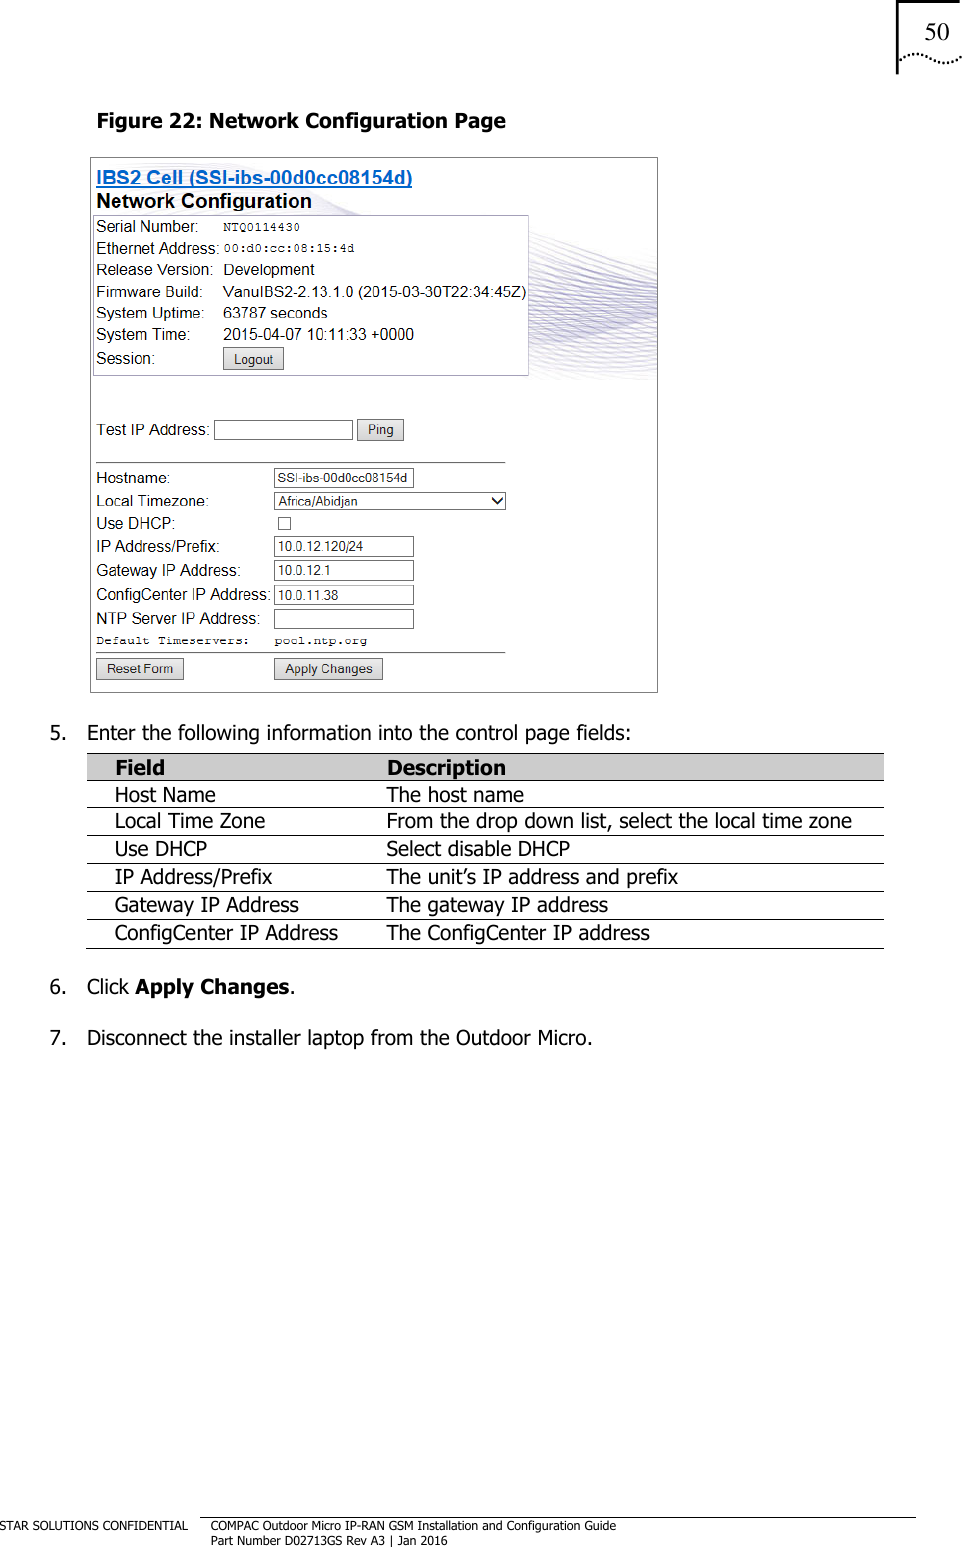 50  STAR SOLUTIONS CONFIDENTIAL COMPAC Outdoor Micro IP-RAN GSM Installation and Configuration Guide Part Number D02713GS Rev A3 | Jan 2016  Figure 22: Network Configuration Page  5. Enter the following information into the control page fields: Field  Description Host Name   The host name Local Time Zone From the drop down list, select the local time zone Use DHCP Select disable DHCP IP Address/Prefix The unit’s IP address and prefix Gateway IP Address The gateway IP address ConfigCenter IP Address The ConfigCenter IP address 6. Click Apply Changes. 7. Disconnect the installer laptop from the Outdoor Micro.   